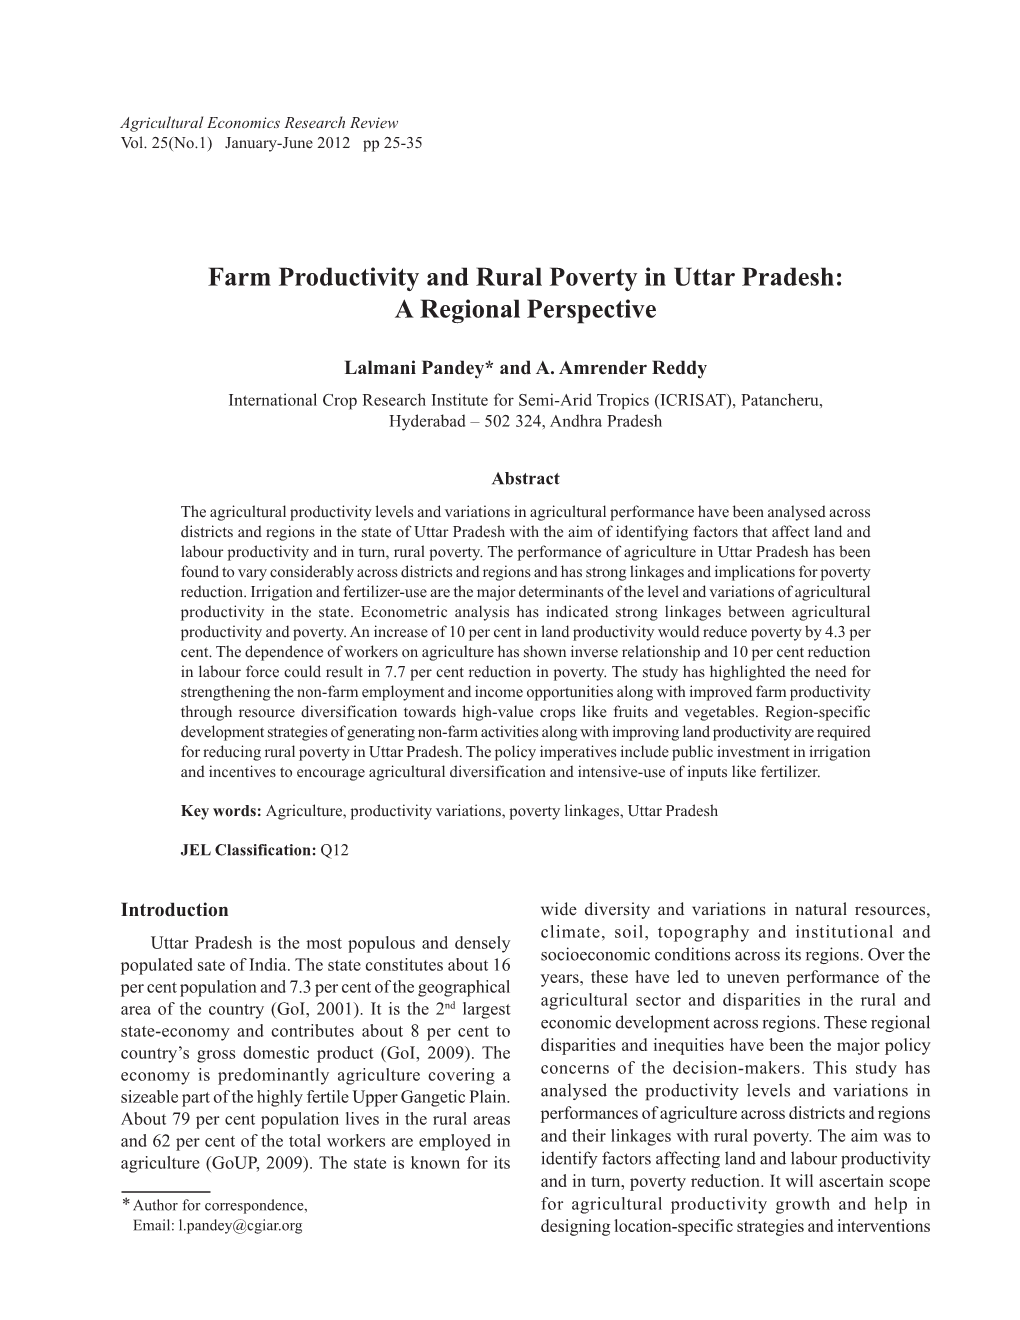 Farm Productivity and Rural Poverty in Uttar Pradesh: a Regional Perspective